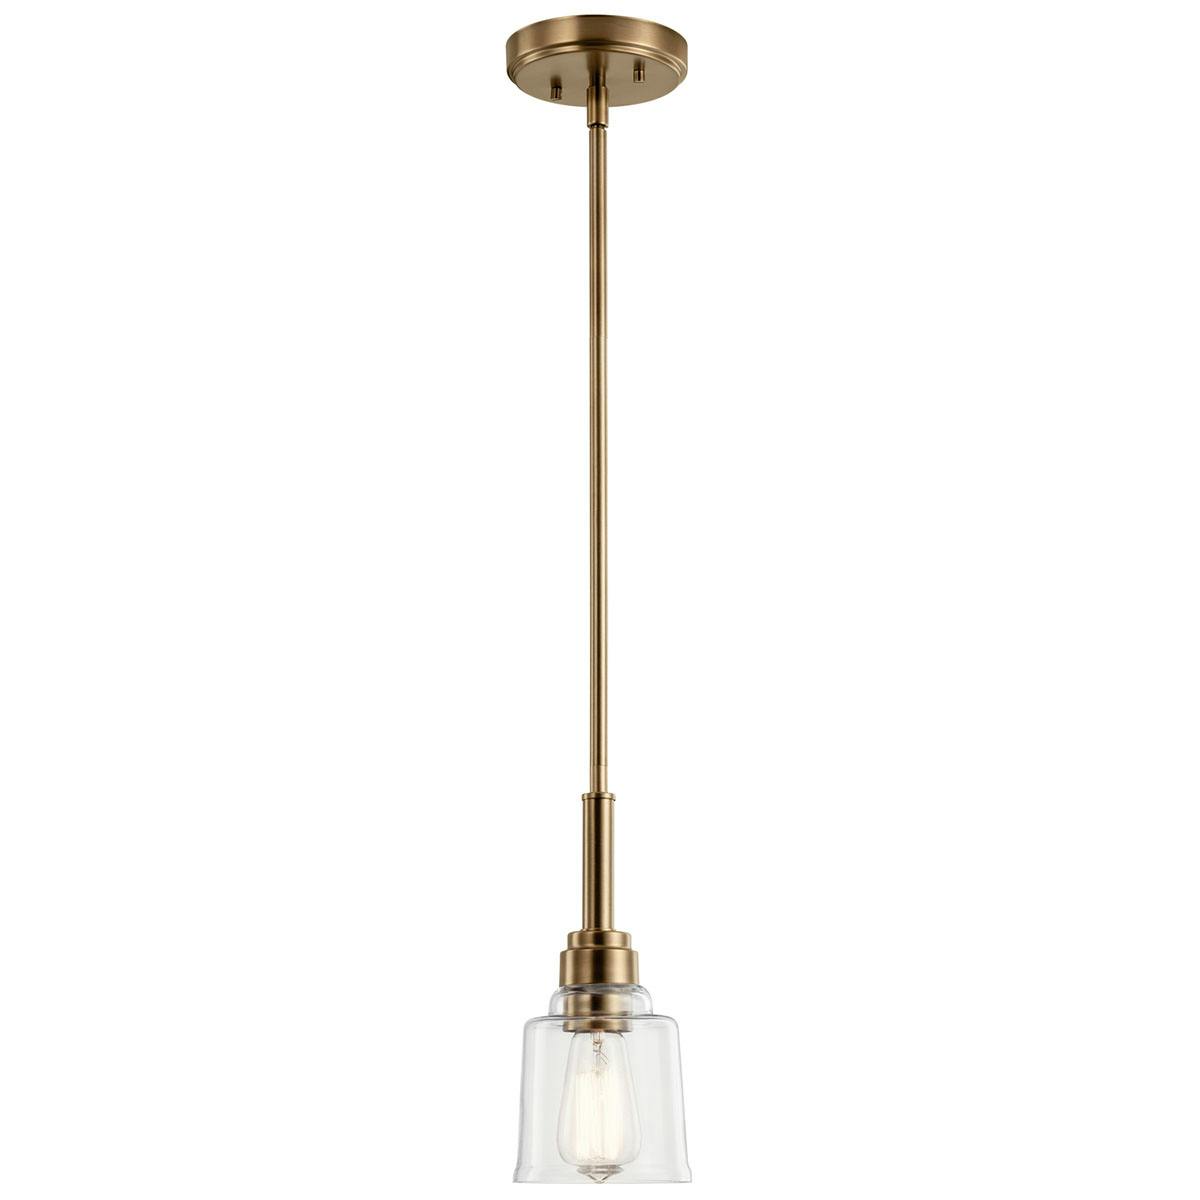 Aivian 5" Mini Pendant Weathered Brass on a white background